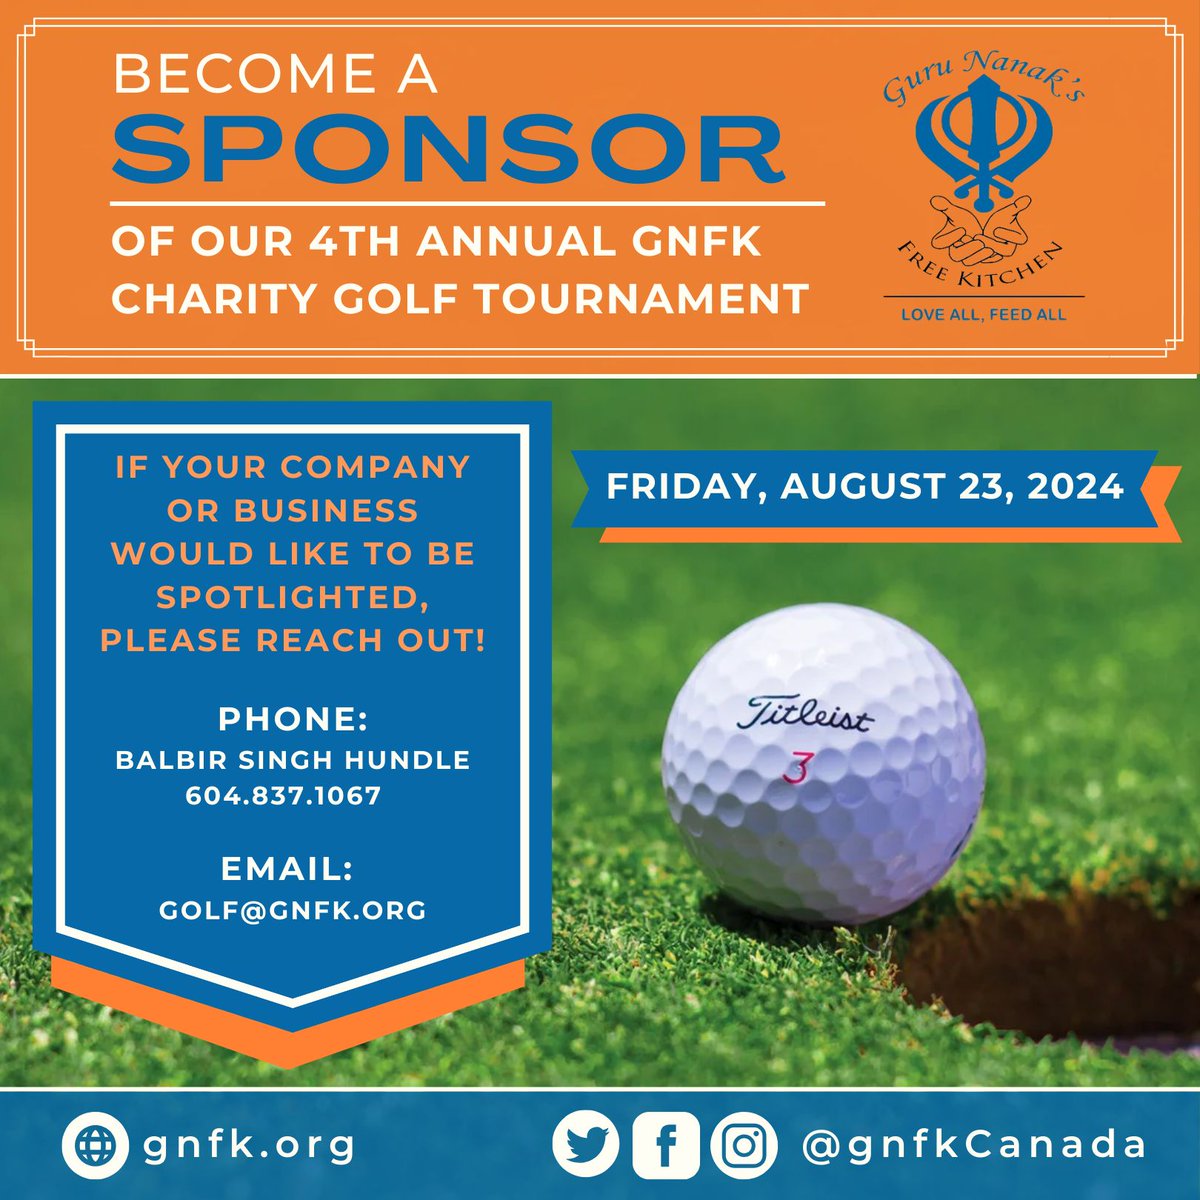 GNFK's 4th Annual Charity Golf Tournament returns on Friday, August 23rd at Mayfair Lakes Golf and Country Club. We are excited to once again invite you to support this great event as a sponsor! #CharityGolf #CommunitySupport #GNFKCanada #LoveAll #FeedAll #MayfairLakeGolf